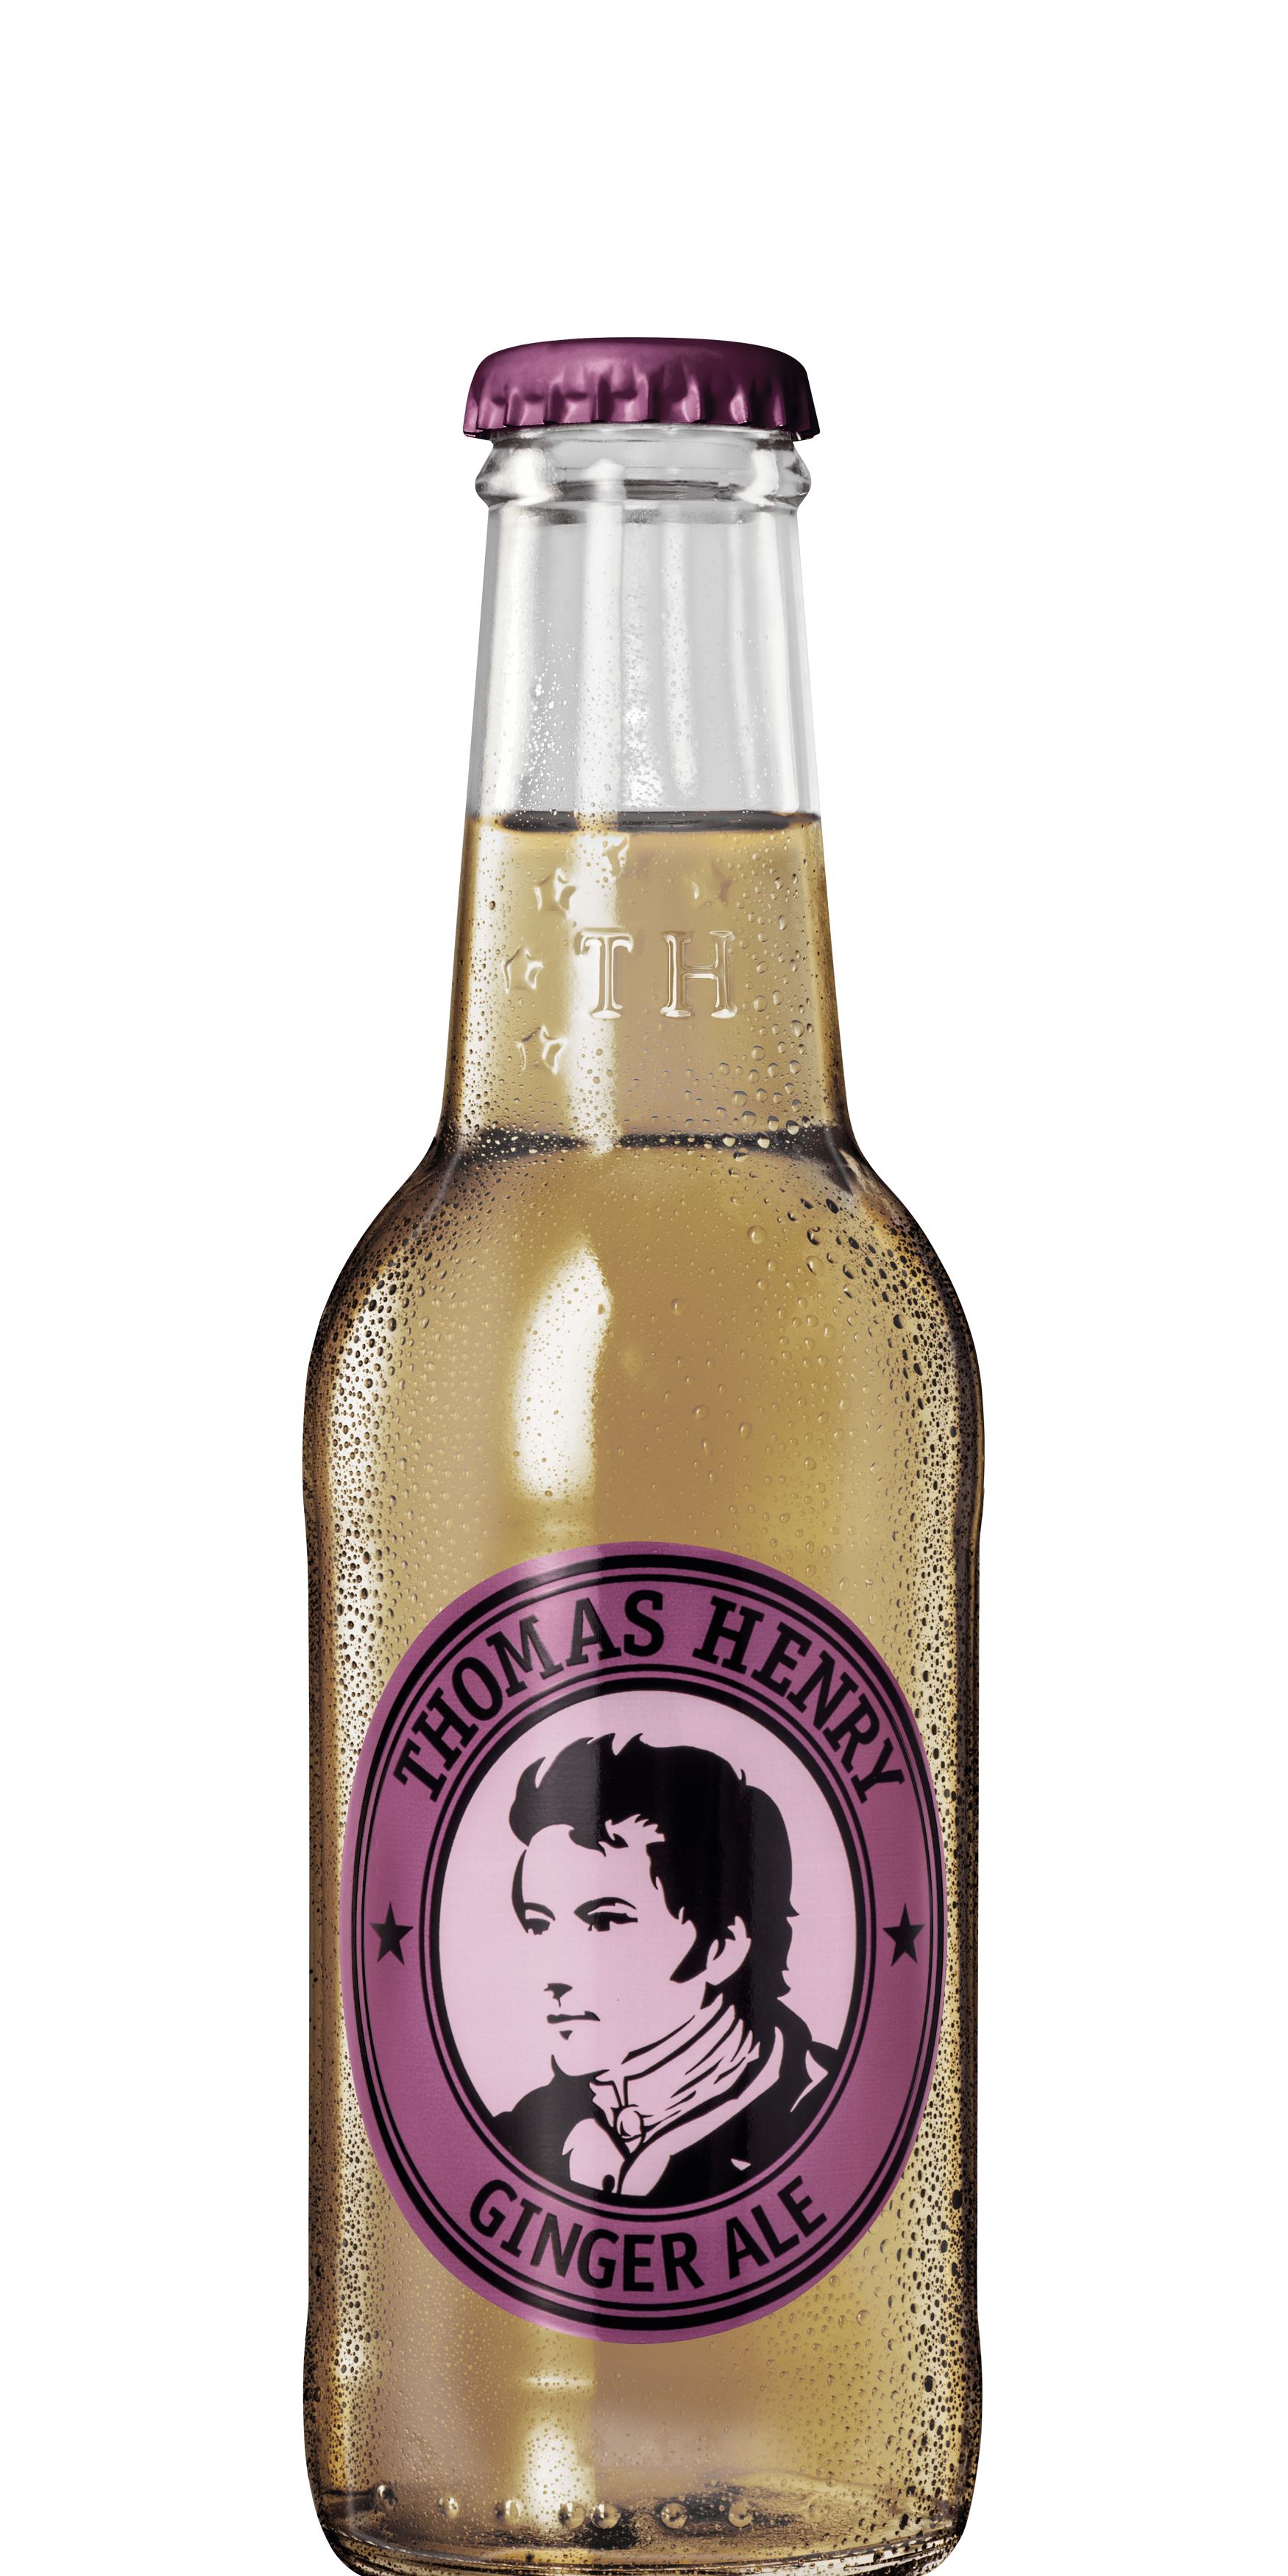 Thomas-Henry_Ginger-Ale_200ml-glass-3500h.png